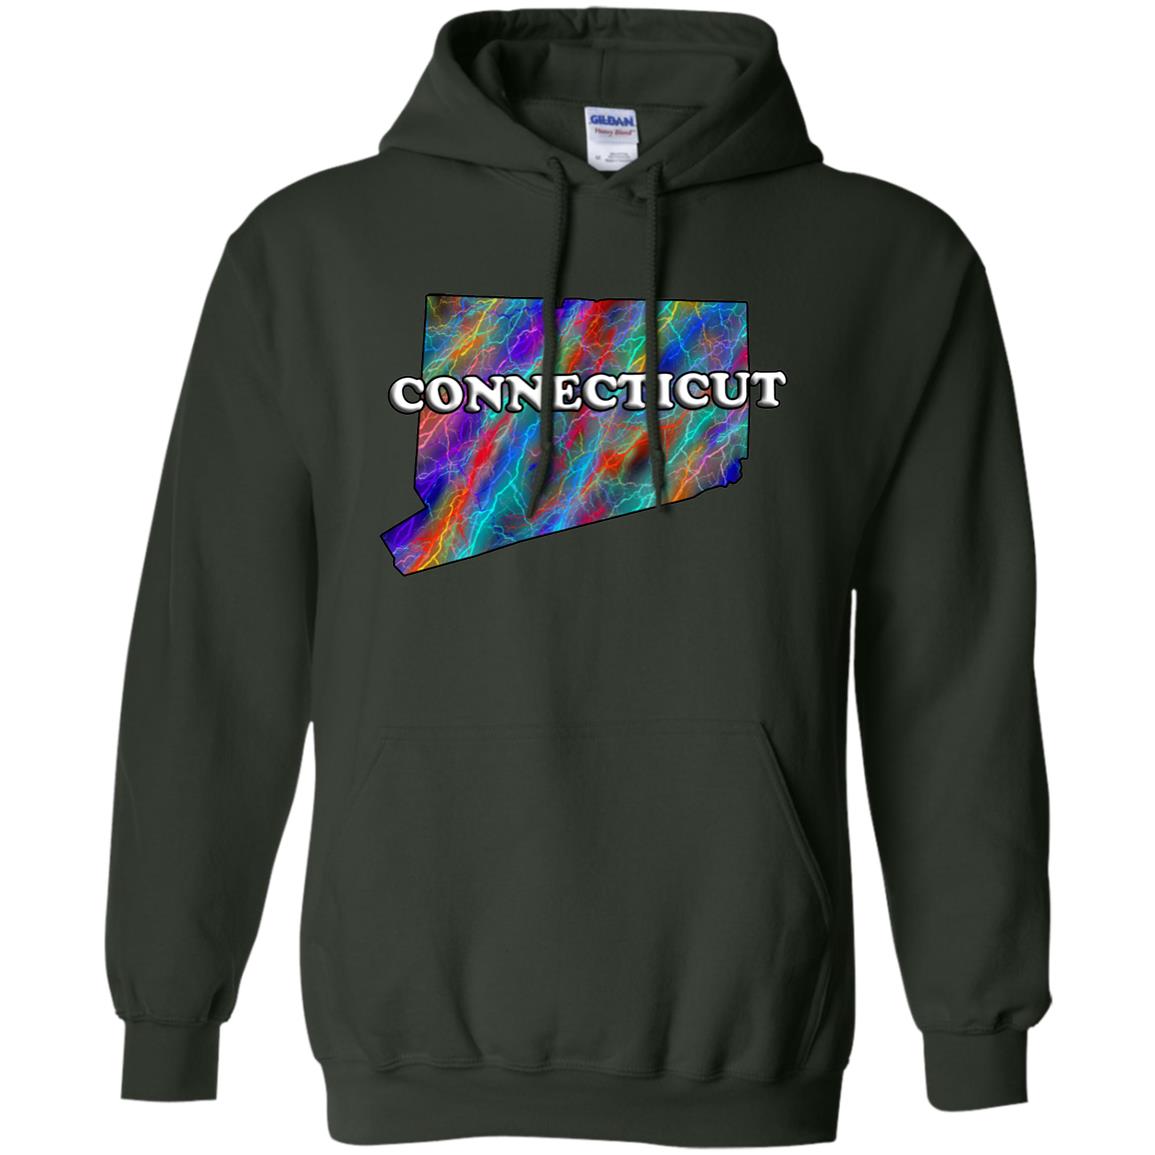 Connecticut State Hoodie